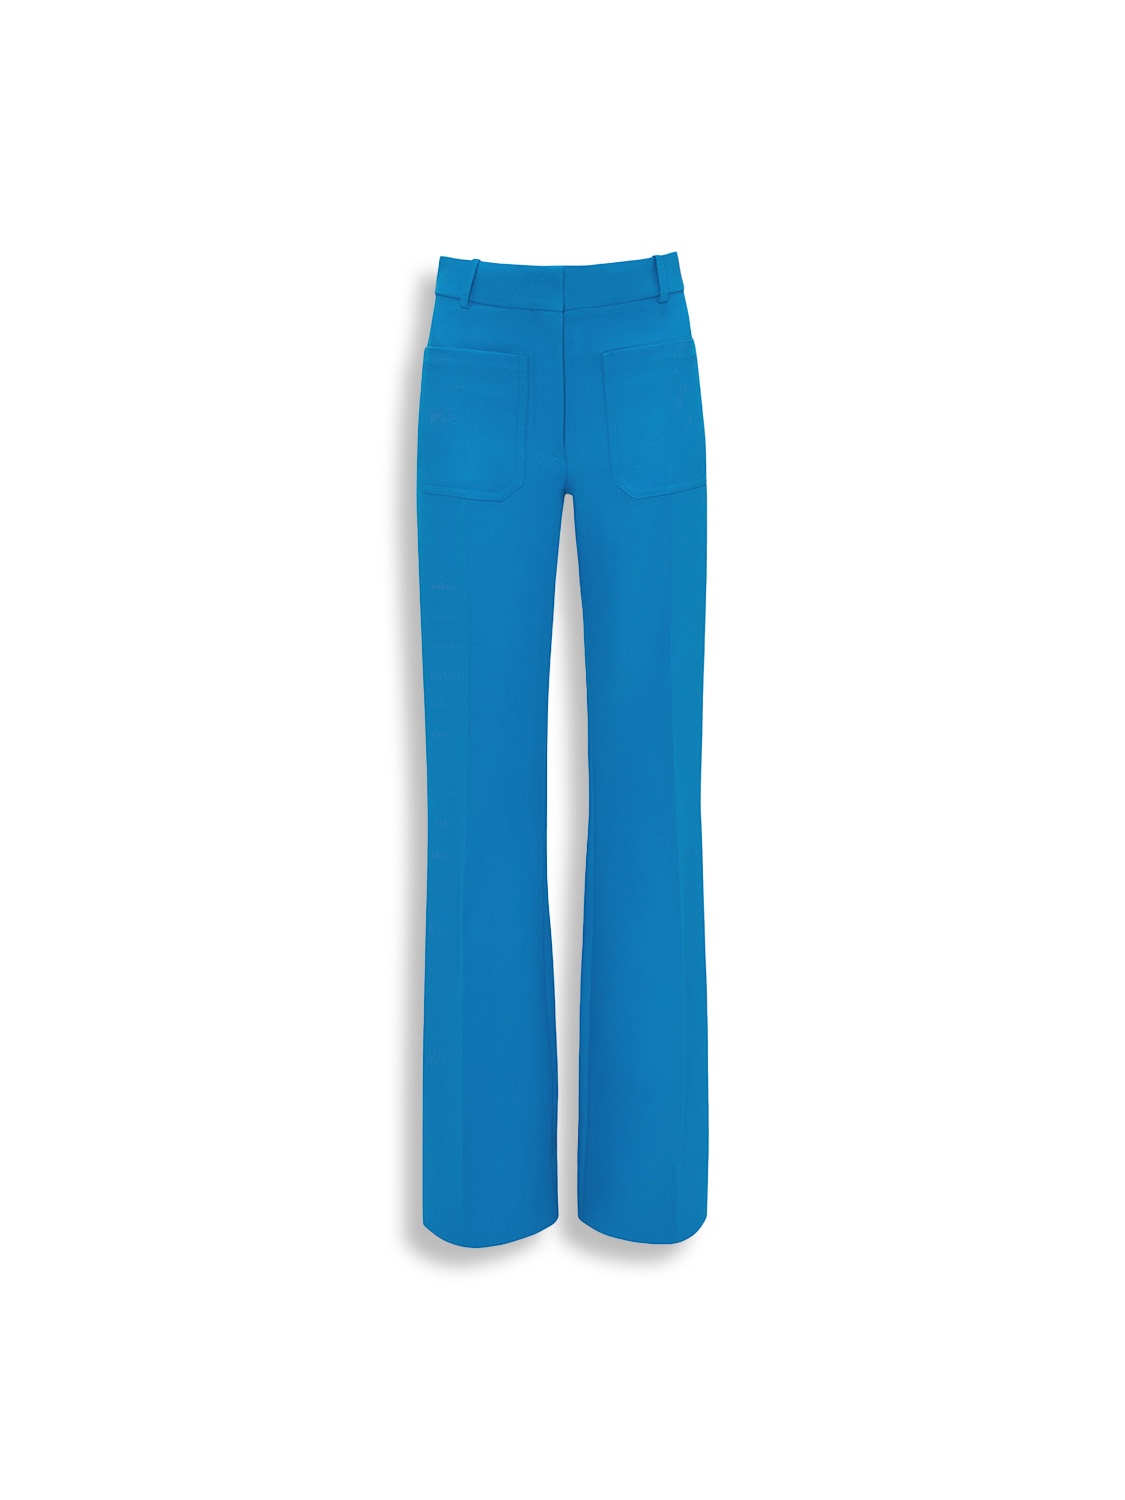 Victoria Beckham Alina Tailored Trousers - Trousers with patch pockets with wide leg blue 38